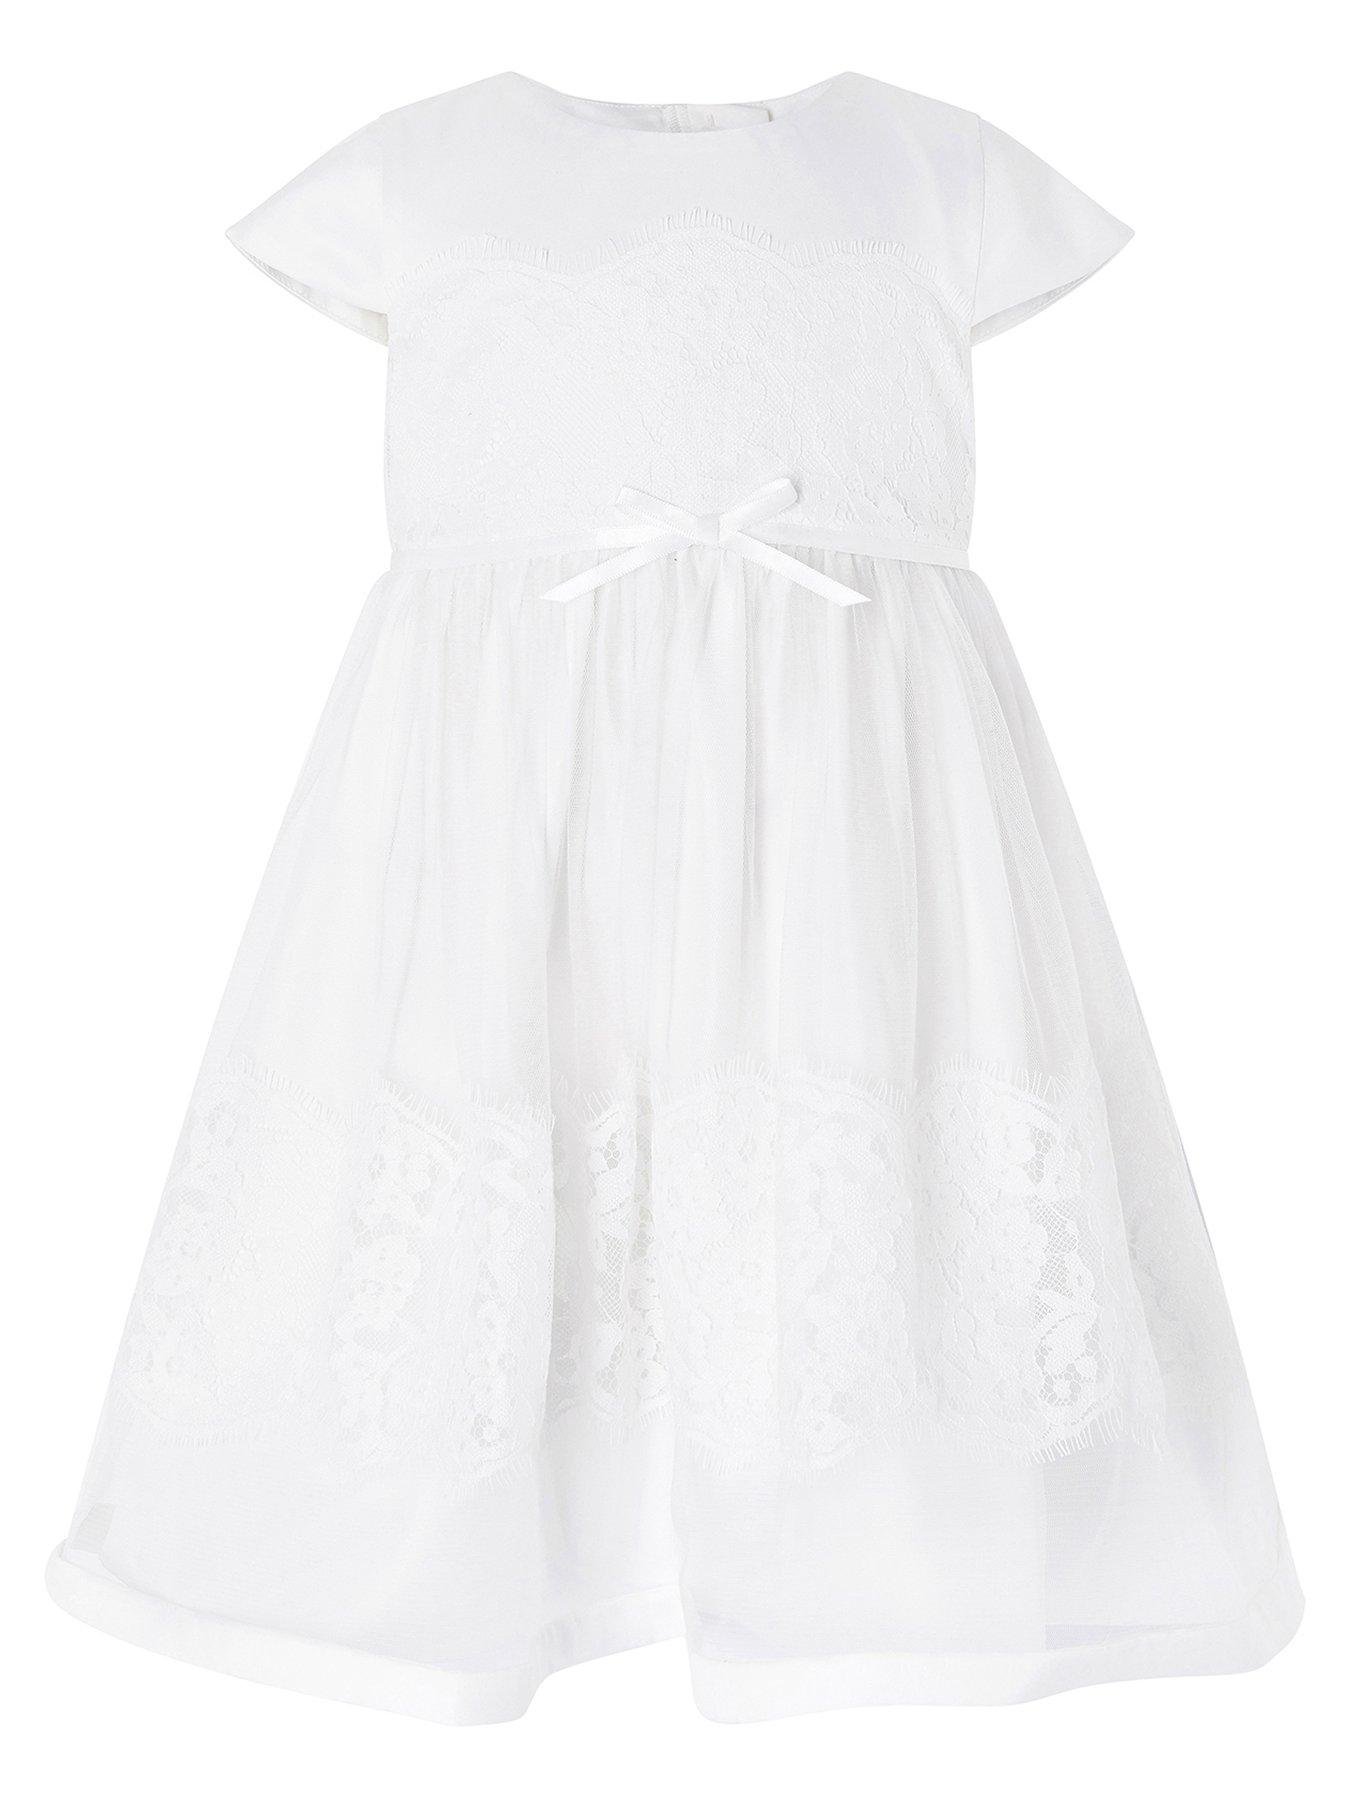 Baby Clothes Baby Girls Alovette Christening Gown - Ivory